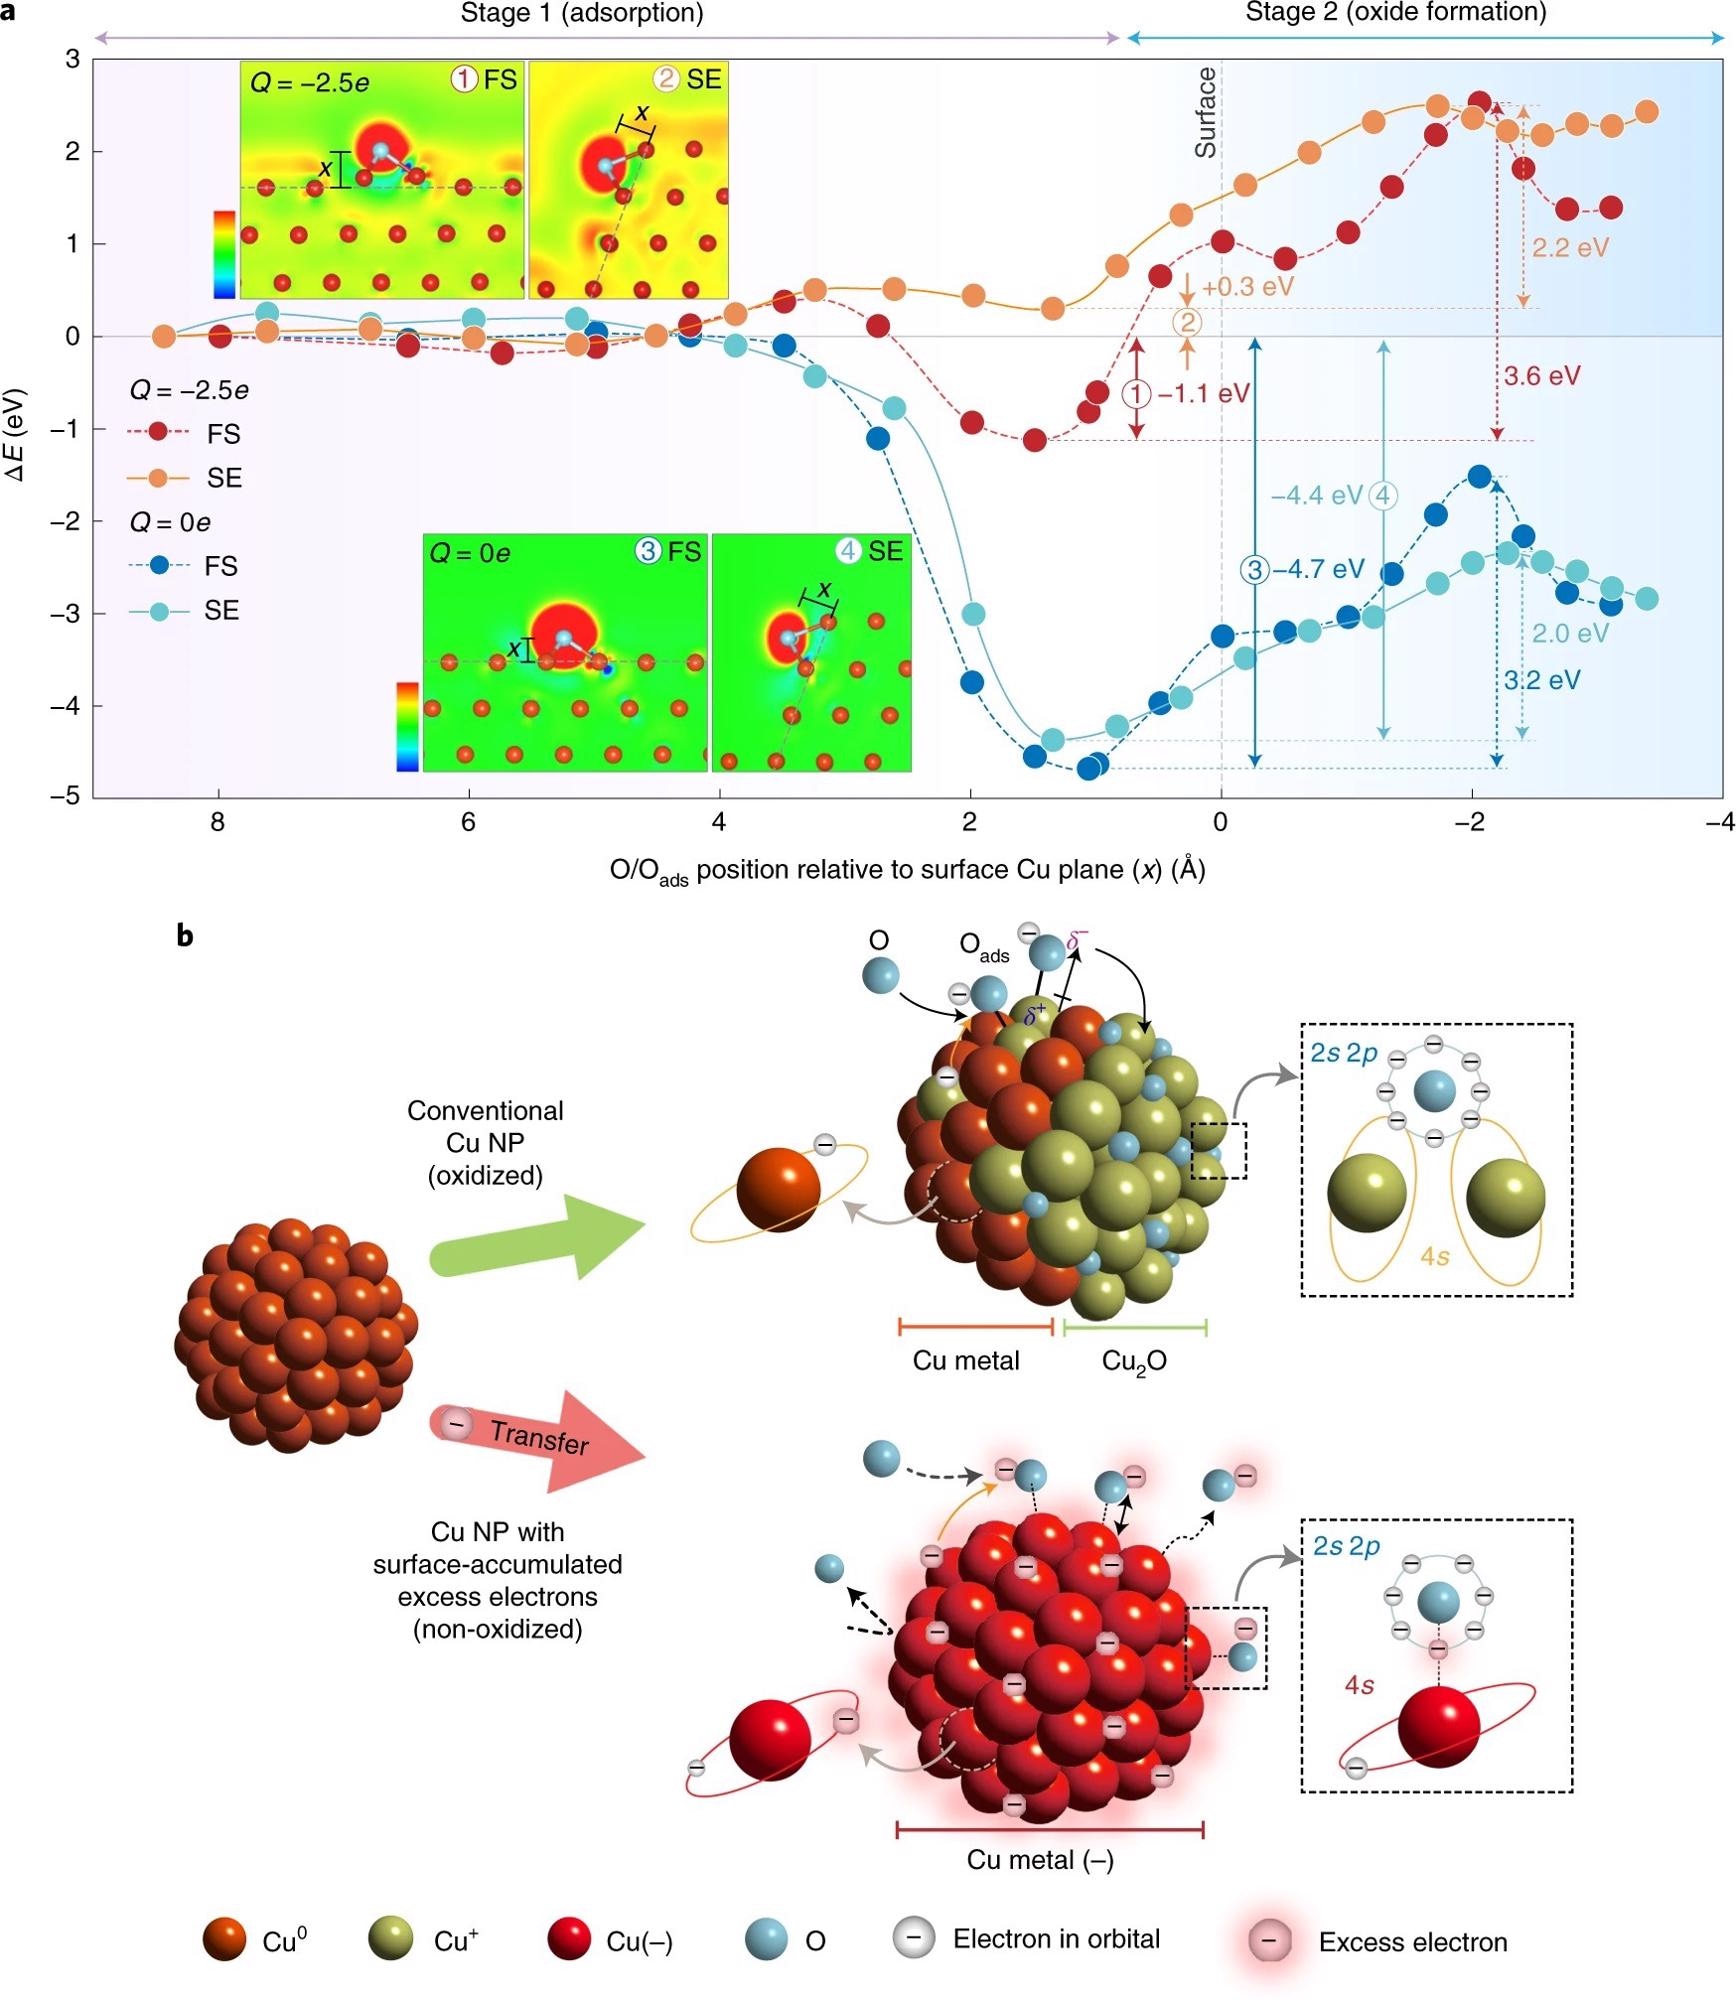 Theoretical analysis and model of oxidation-resistant Cu NPs.